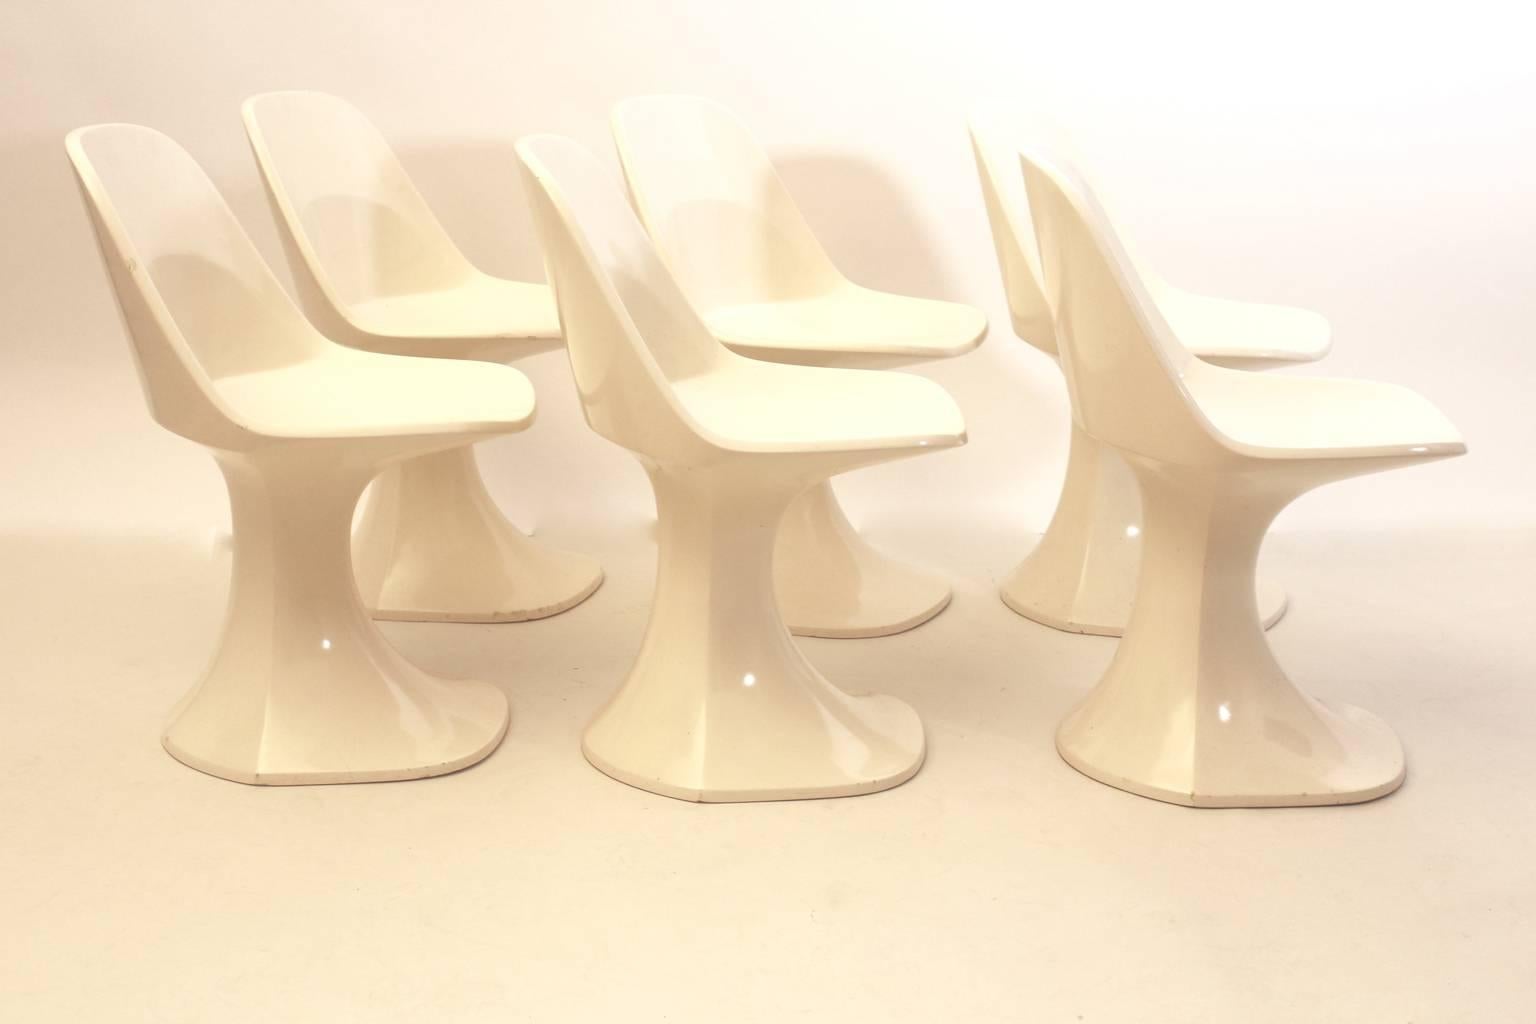 Space Age Sculptural White Fiberglass Plastic Dining Room Set Finland 1970s In Good Condition For Sale In Vienna, AT